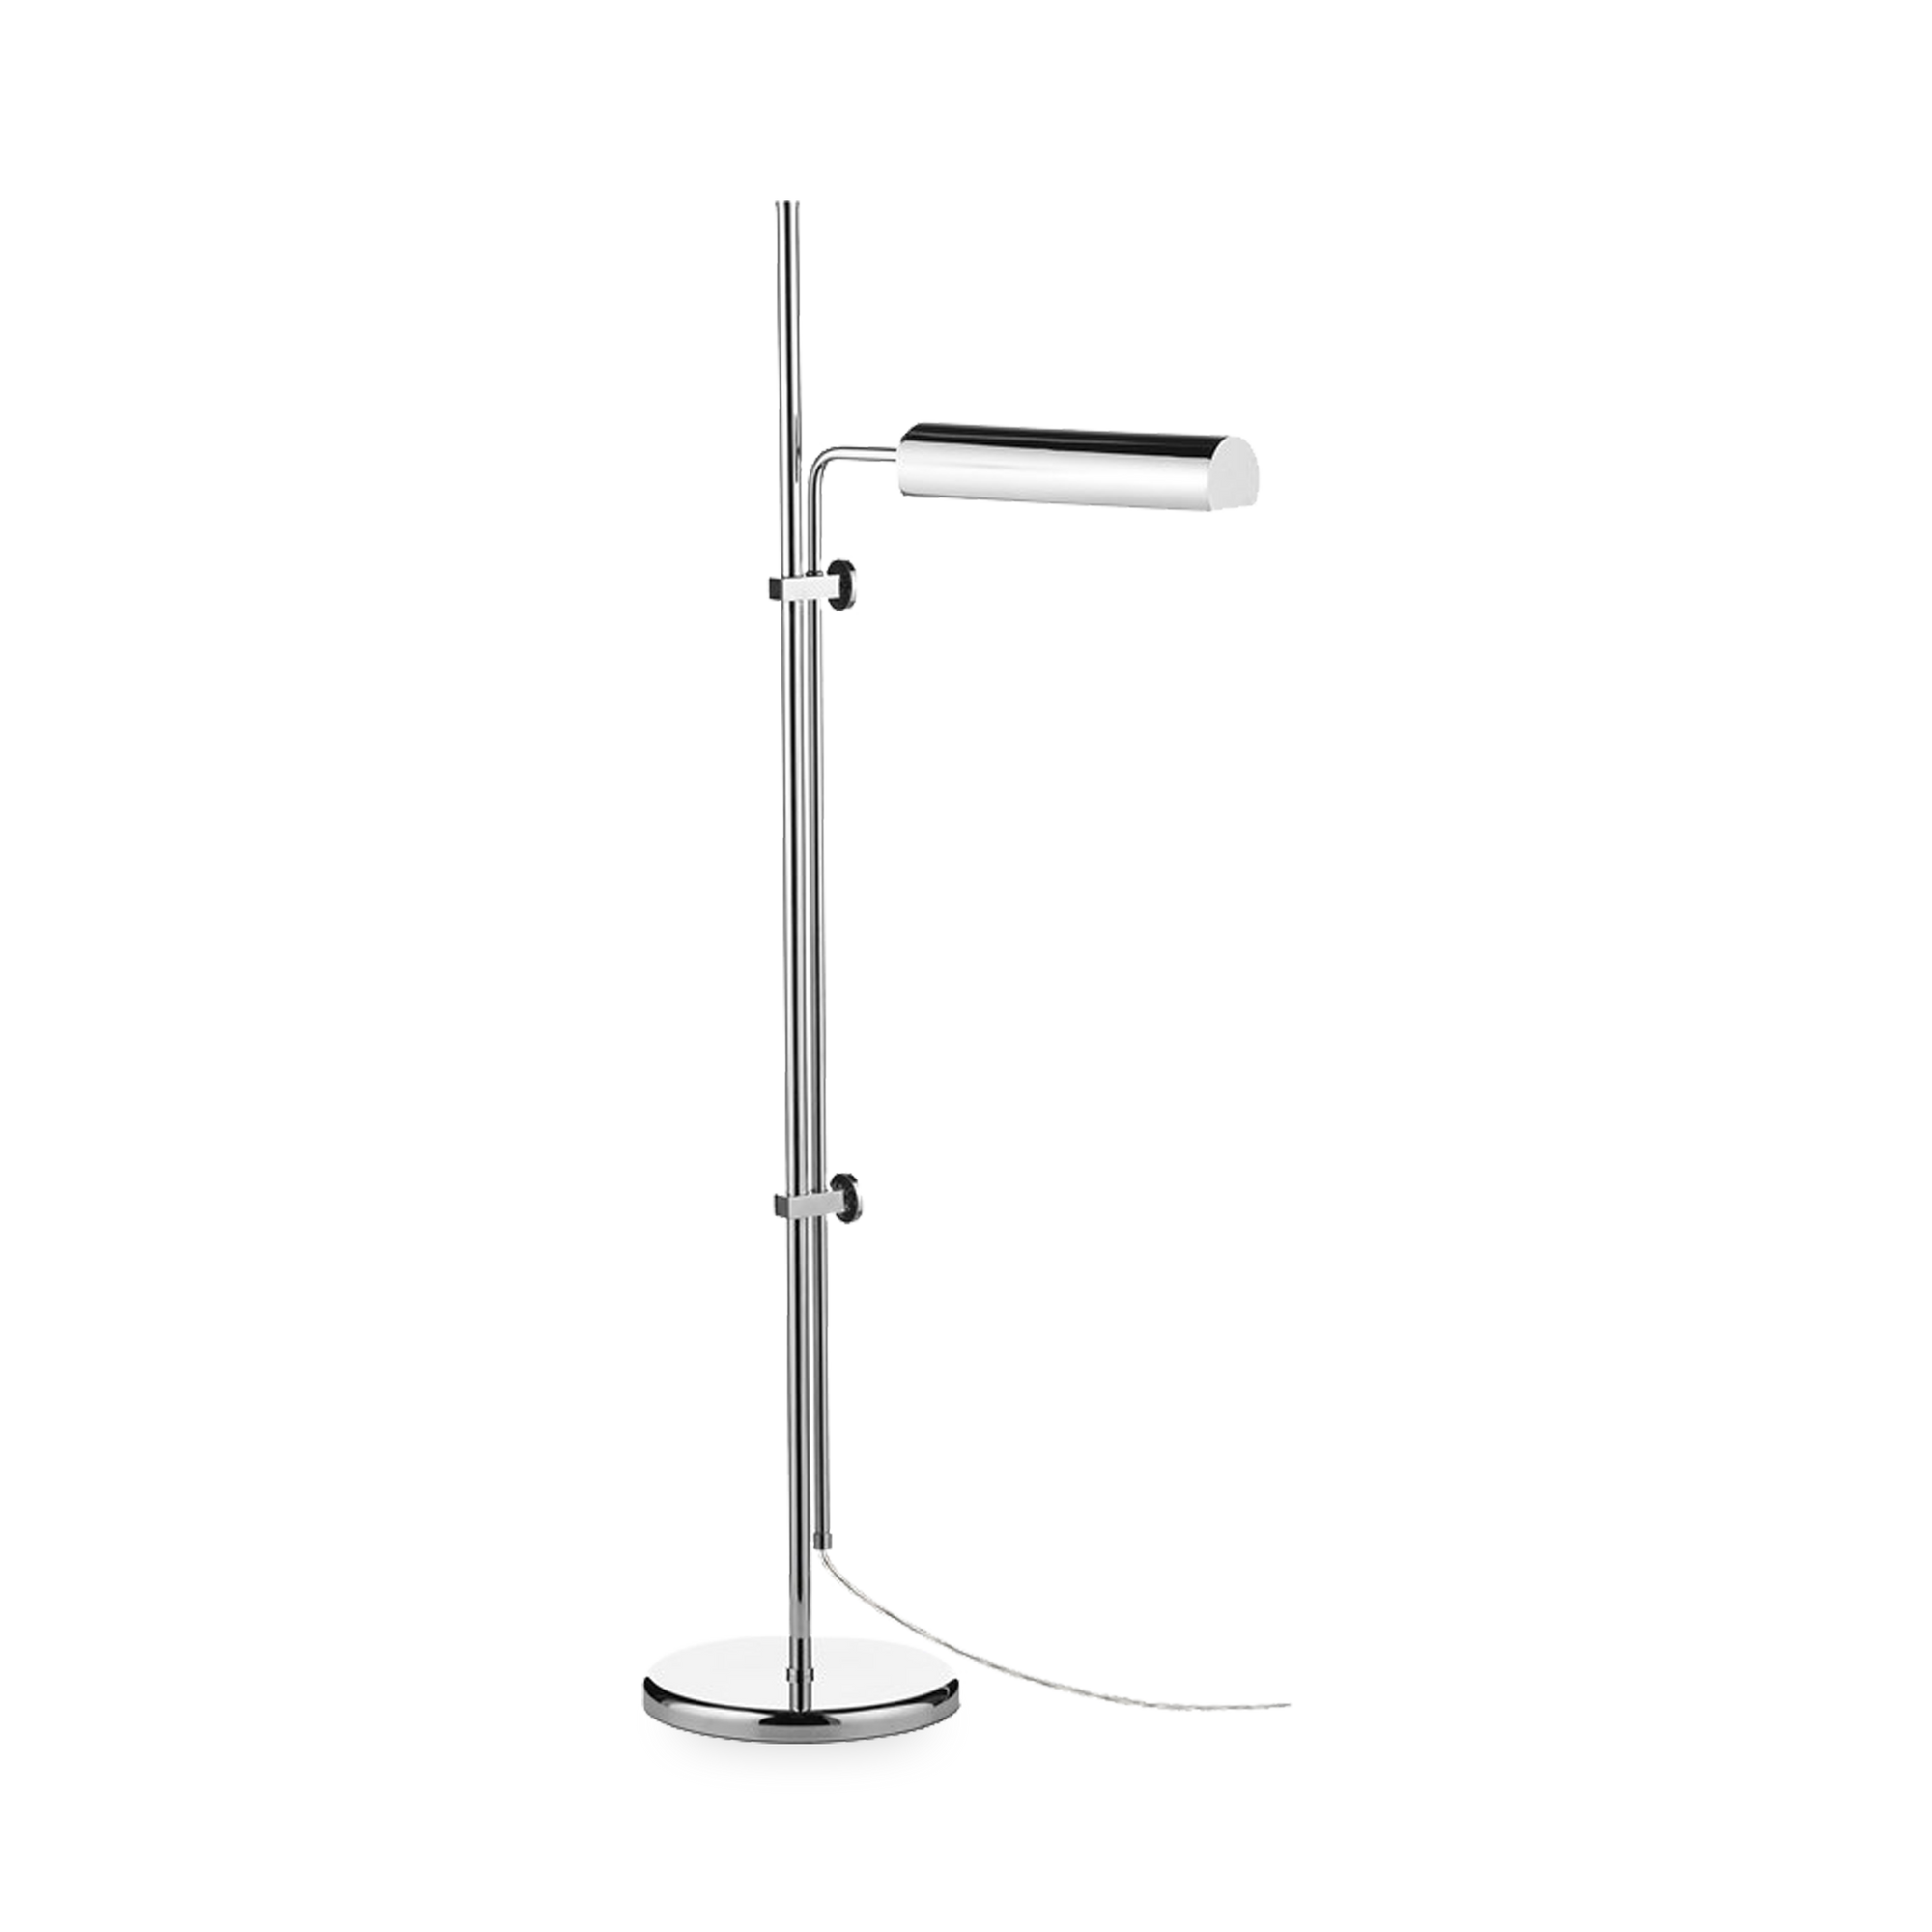 The LED Floor Lamp's thin stems tick the box of minimalism all while it turns from side to side, can be adjusted up and down, and has an integrated LED, making it a stalwart choice